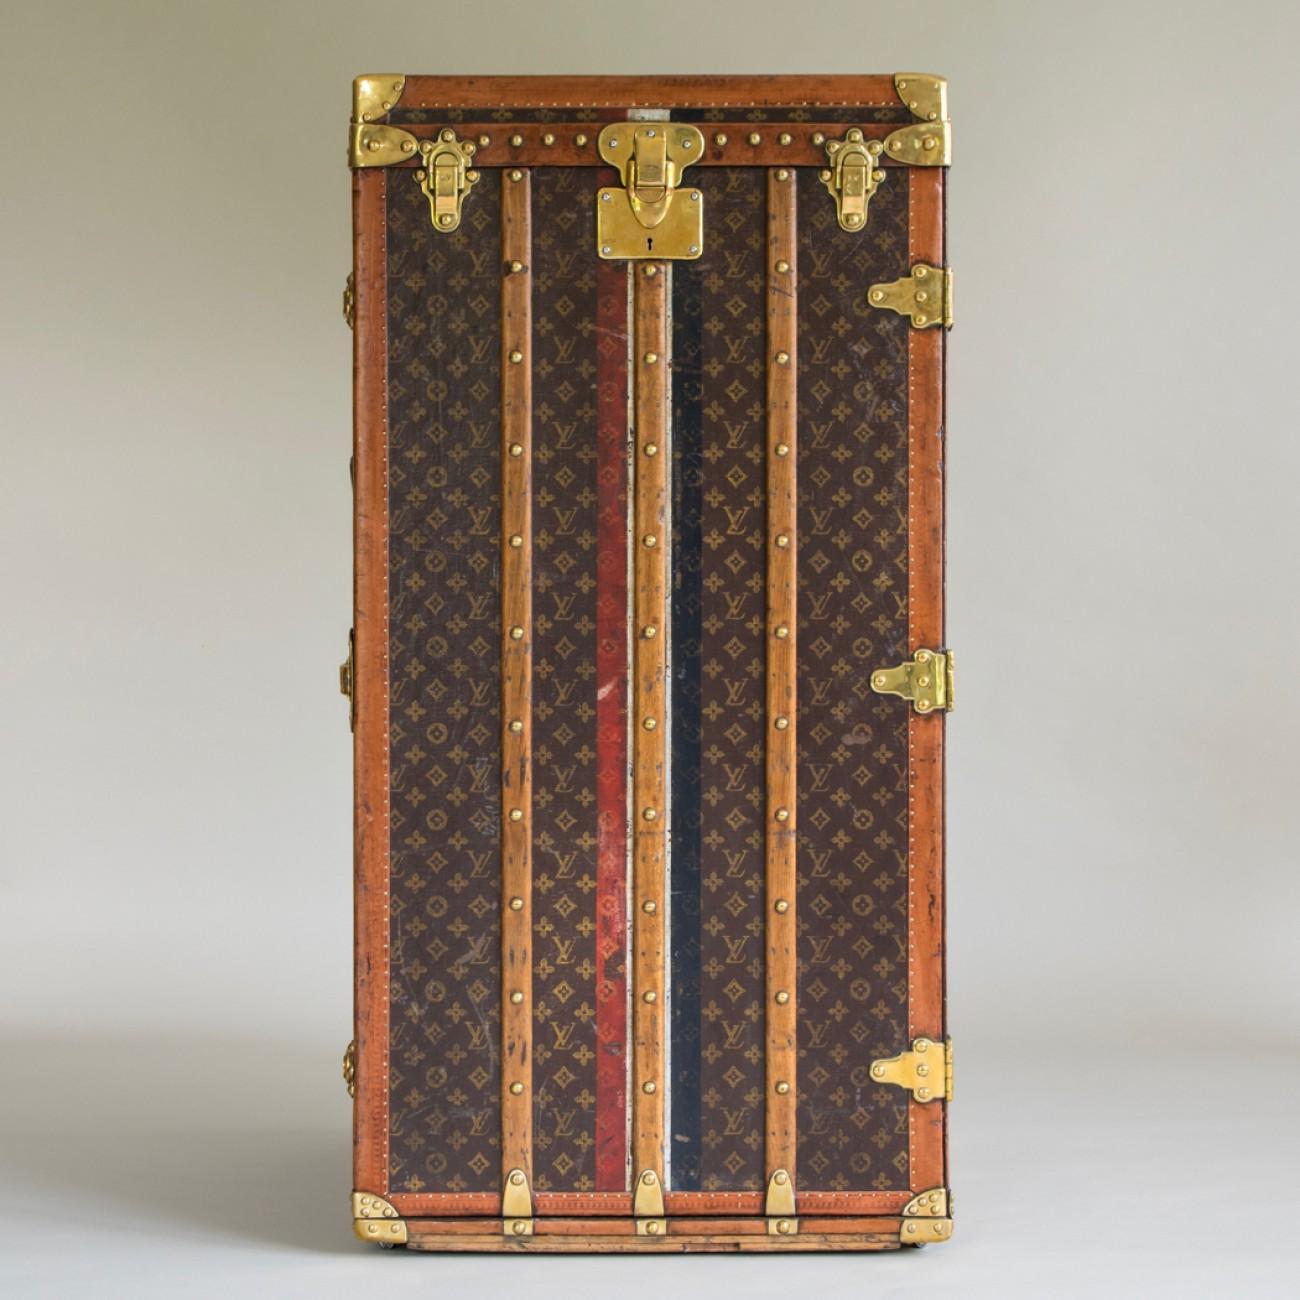 An exceptionally Large Louis Vuitton Wardrobe Trunk in LV Monogram with lozine trim and original interior fittings providing hanging space, circa 1916. The substantial leather handles of this trunk have been replaced to the original pattern.

Louis